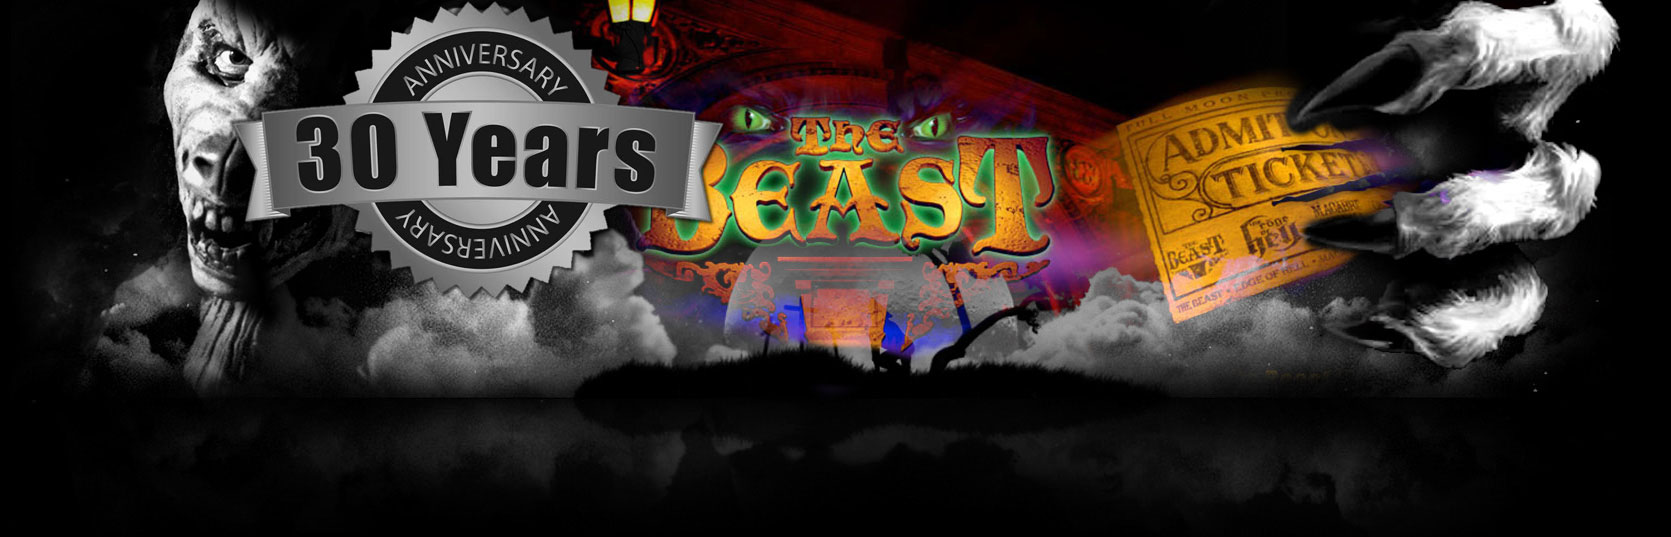 Visit The Beast Haunted House One Of The Nation S Best